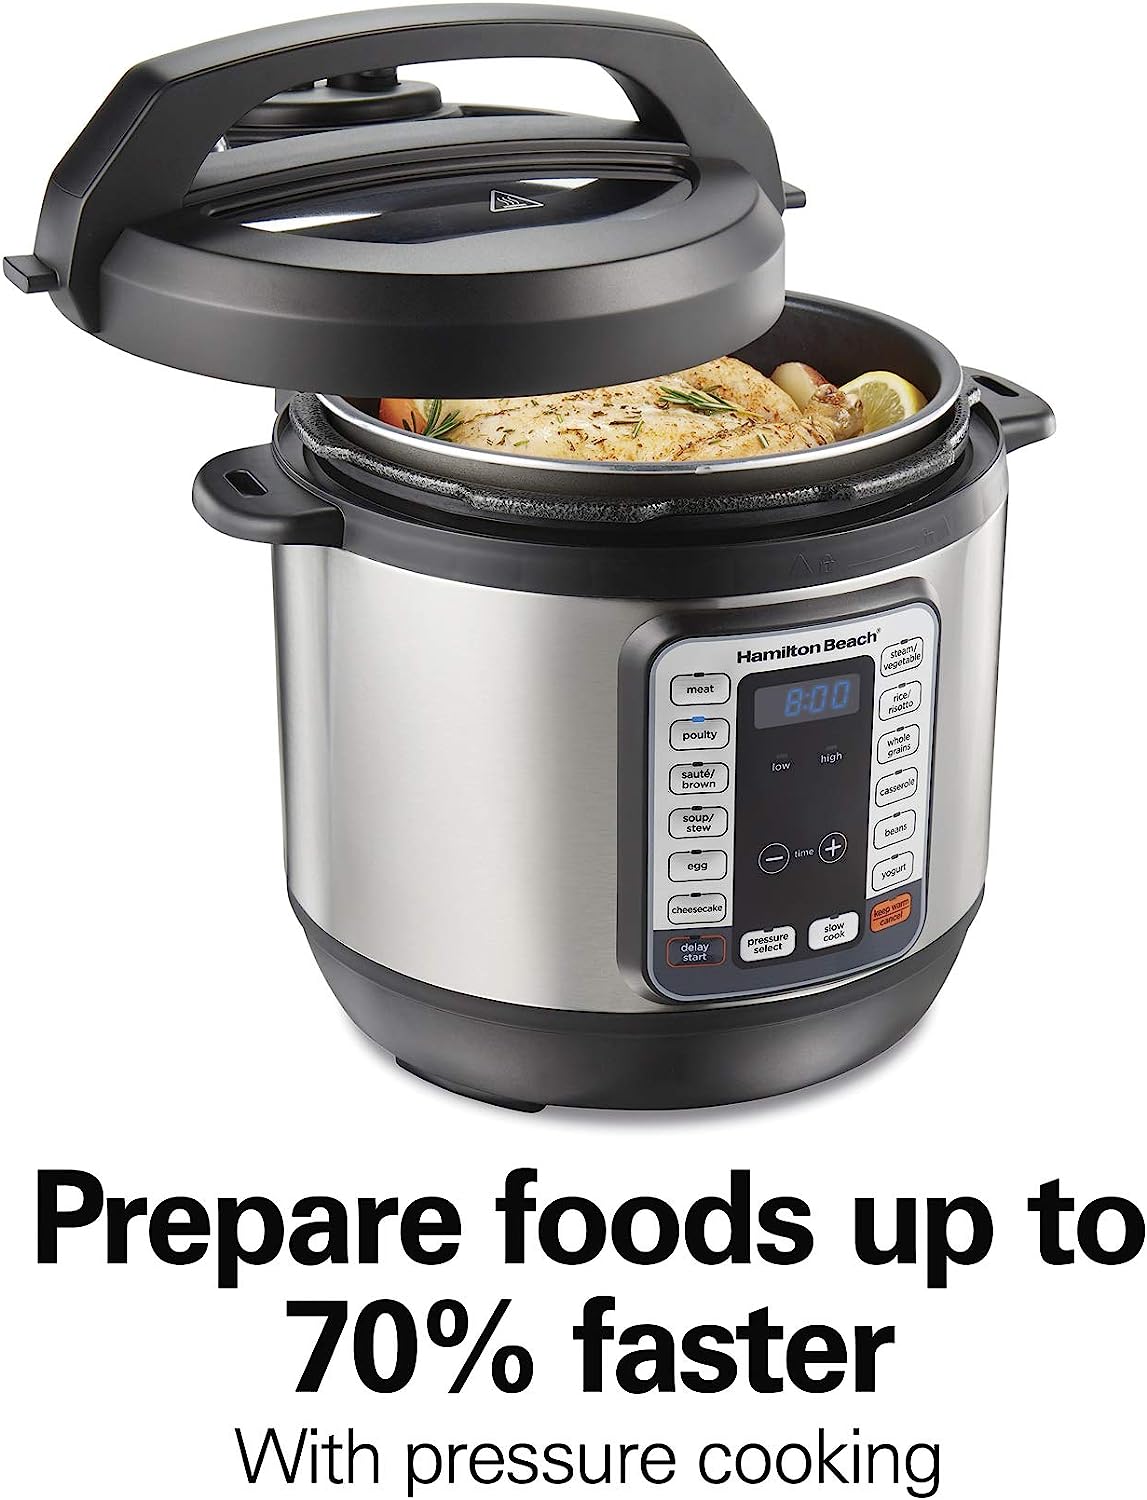 Hamilton Beach 12-in-1 Electric Pressure Cooker with True Slow Cook Technology, Sautés, Browns, Steams, Rice Function, Egg and More, 8 Quart Capacity, Stainless Steel (34508)